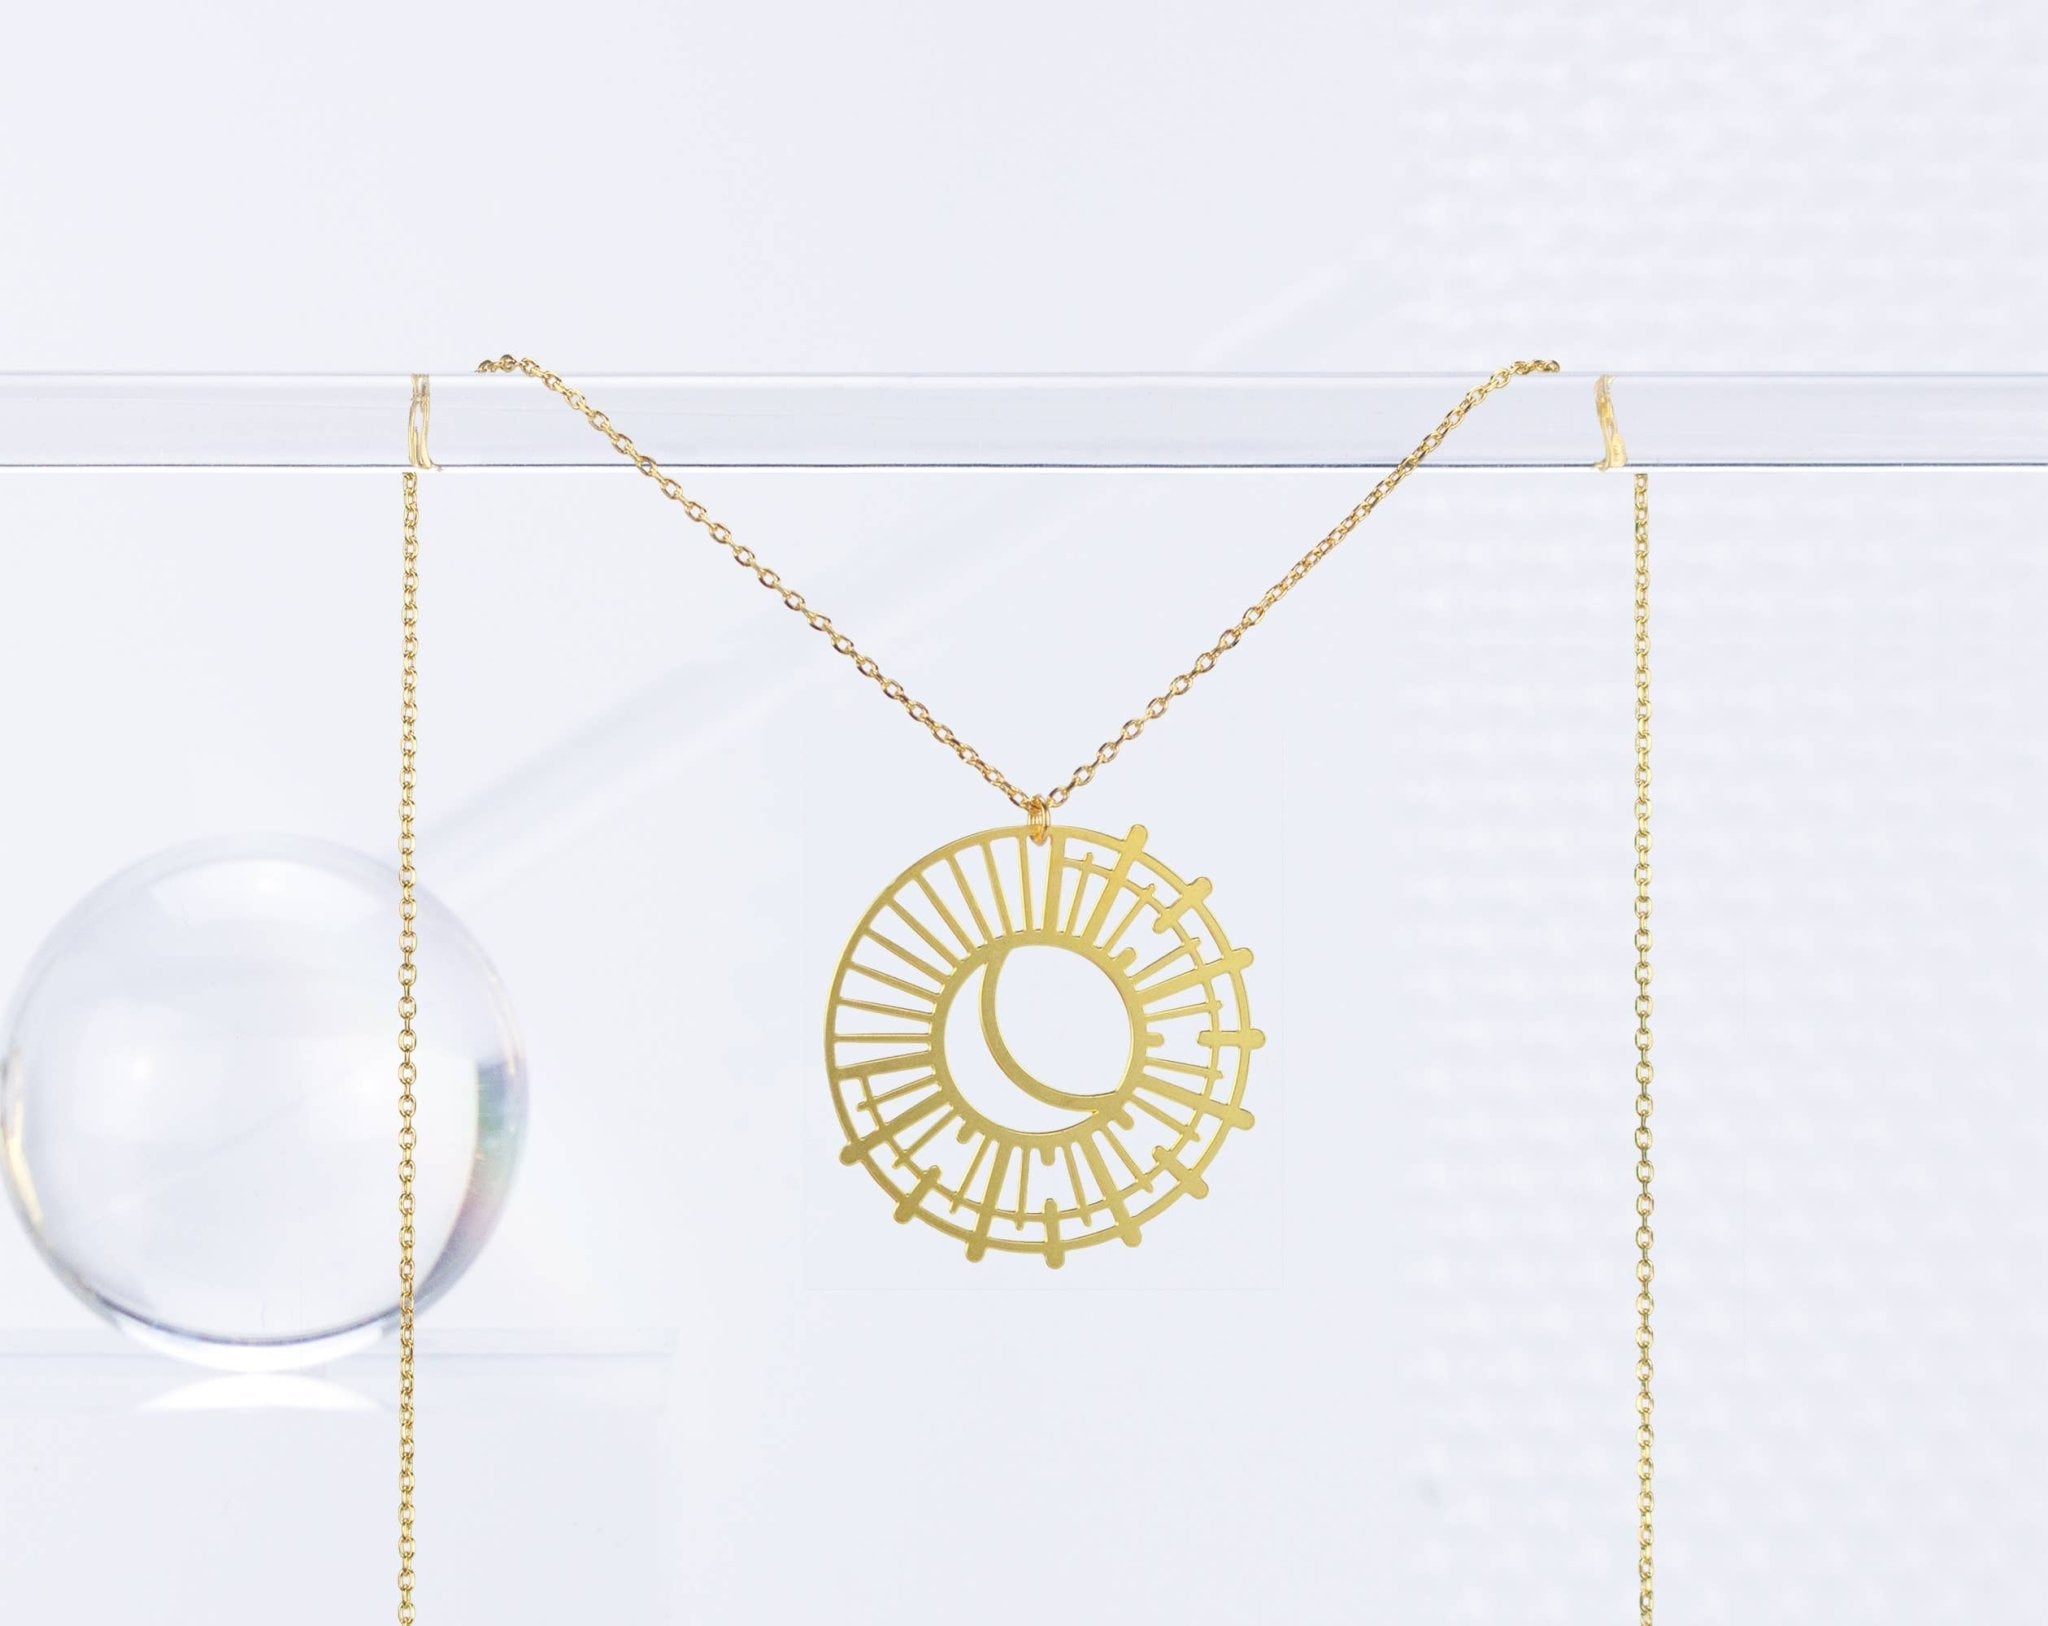 Sun and Moon Necklace | Silver - Spiral Circle